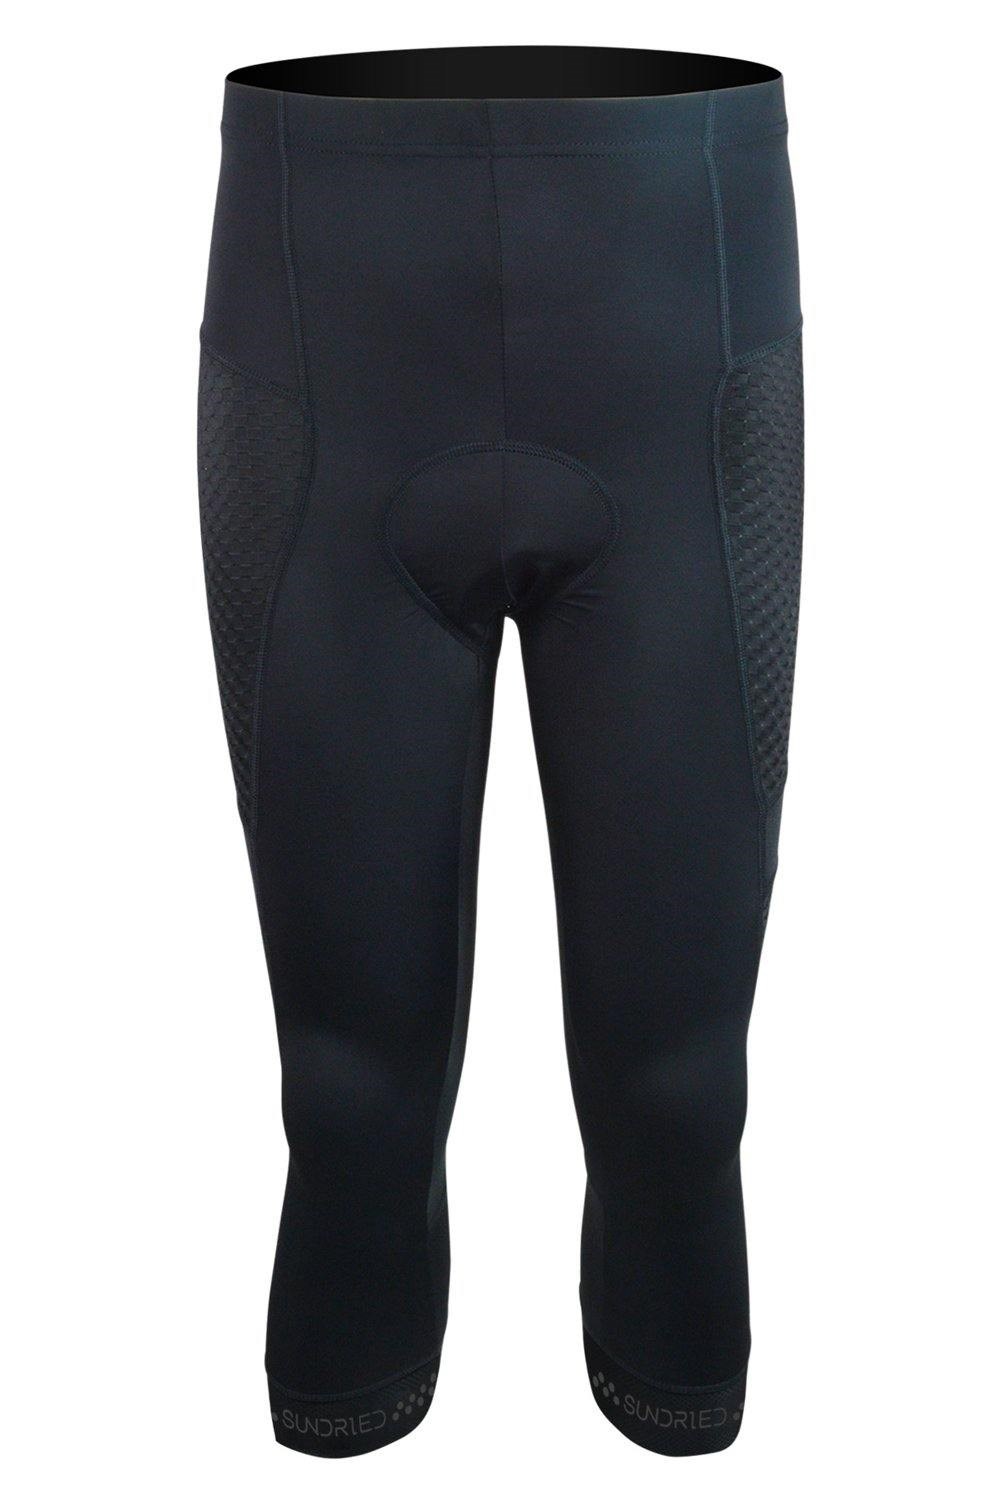 Stealth Mens 3/4 Cycle Tights -